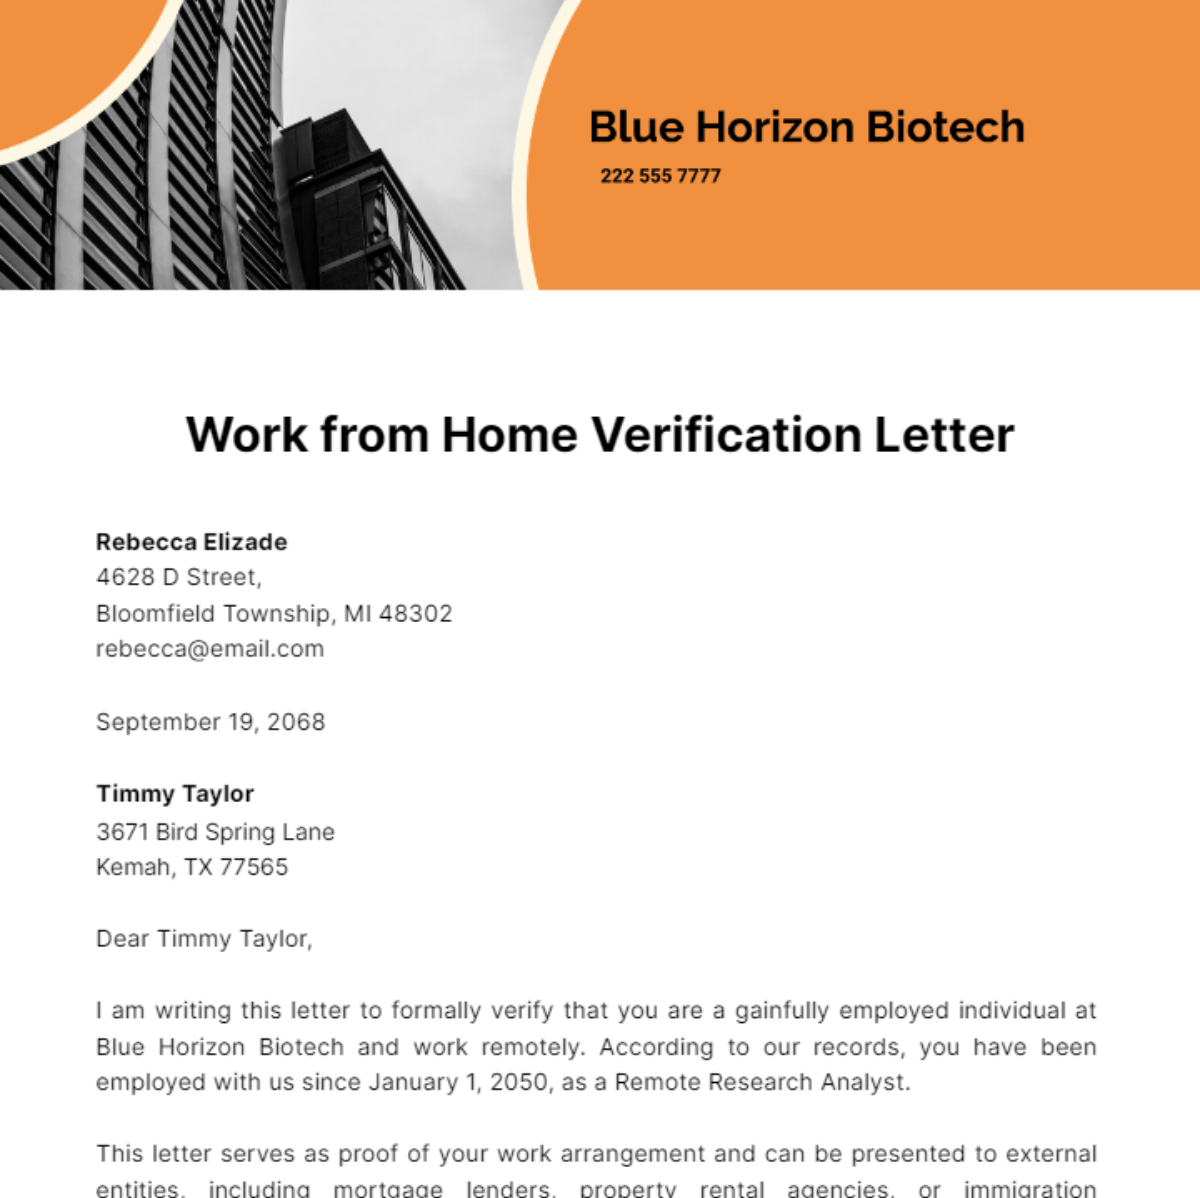 Work from Home Verification Letter Template